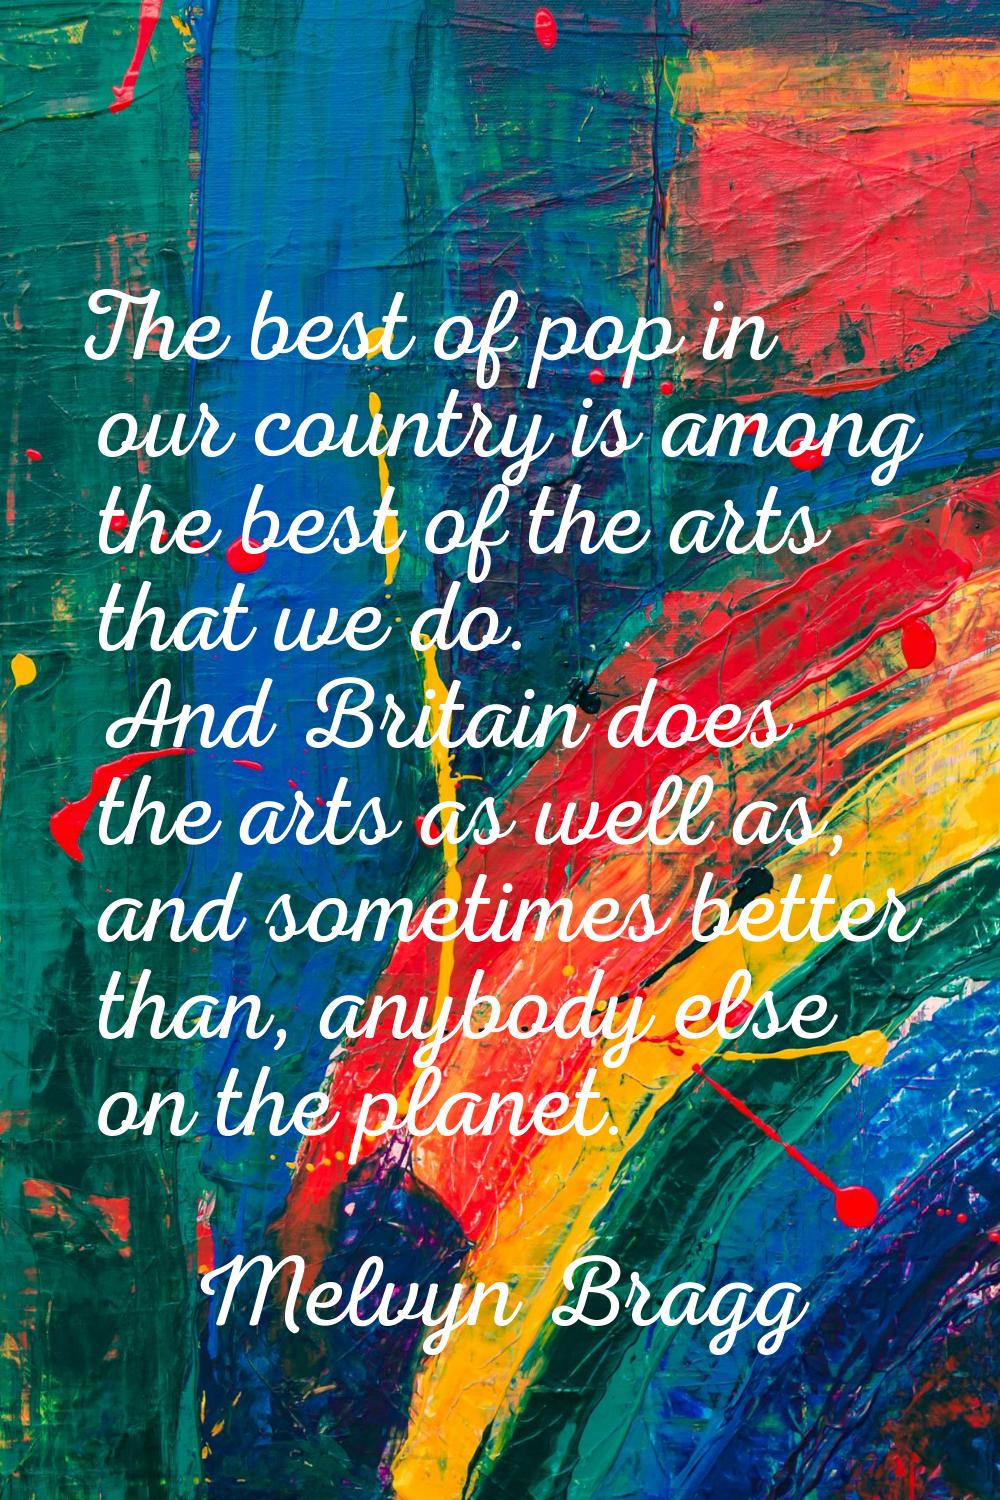 The best of pop in our country is among the best of the arts that we do. And Britain does the arts 